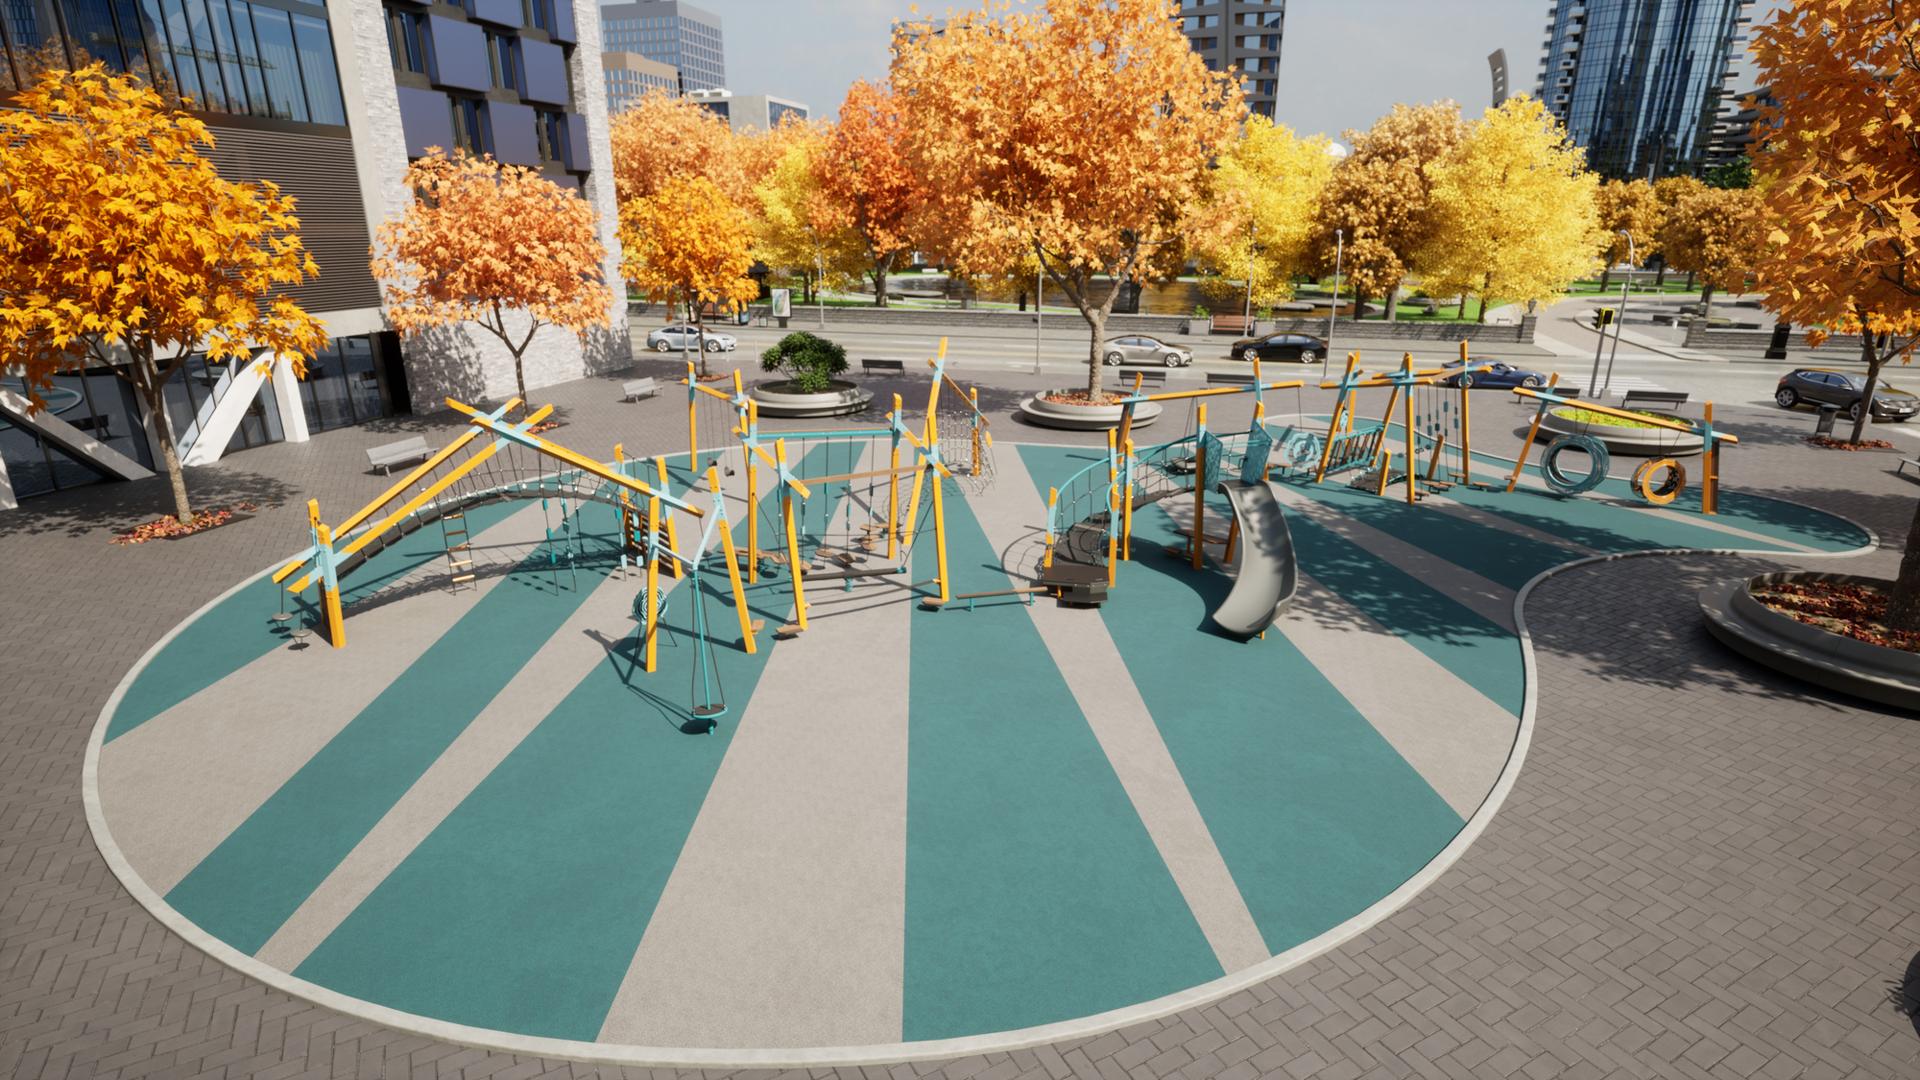 Animated rendering with an elevated view of a play area with modern designed playground structures placed in the courtyard of a building. Yellowing fall trees are scattered around the courtyard. 